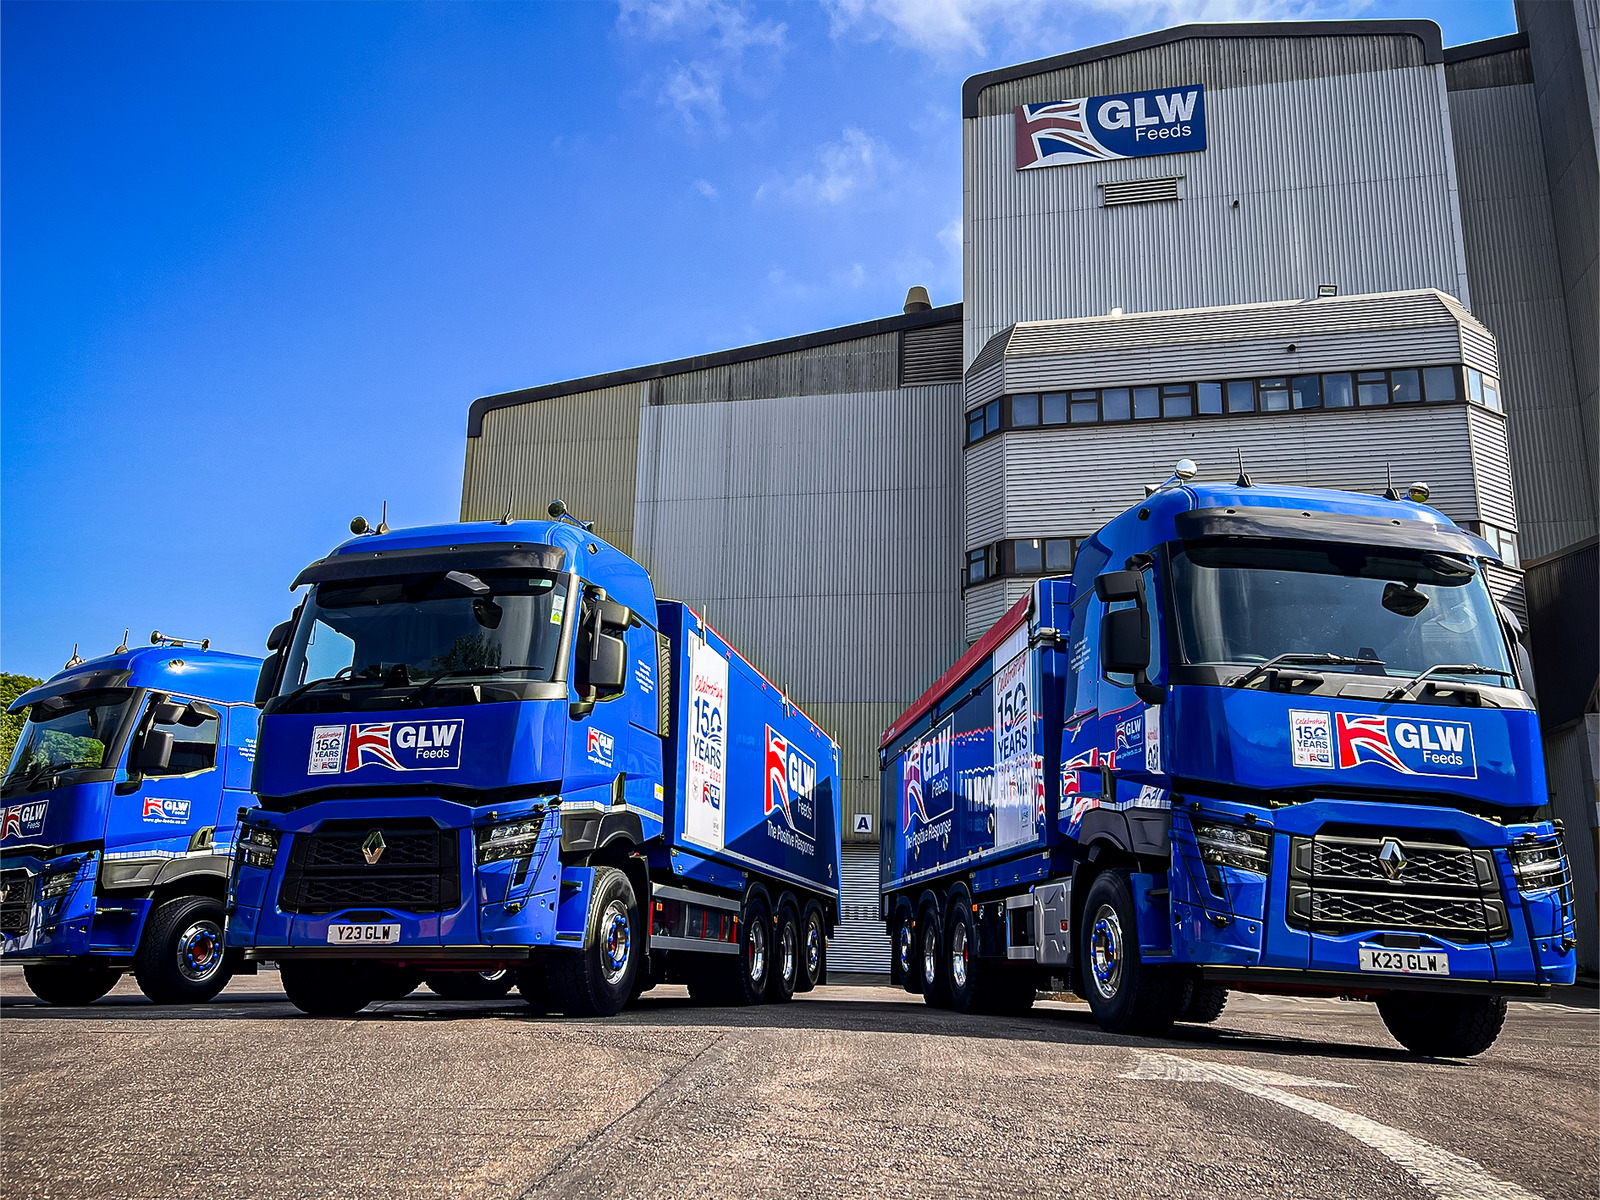 Three Renault C440s for GLW Feeds